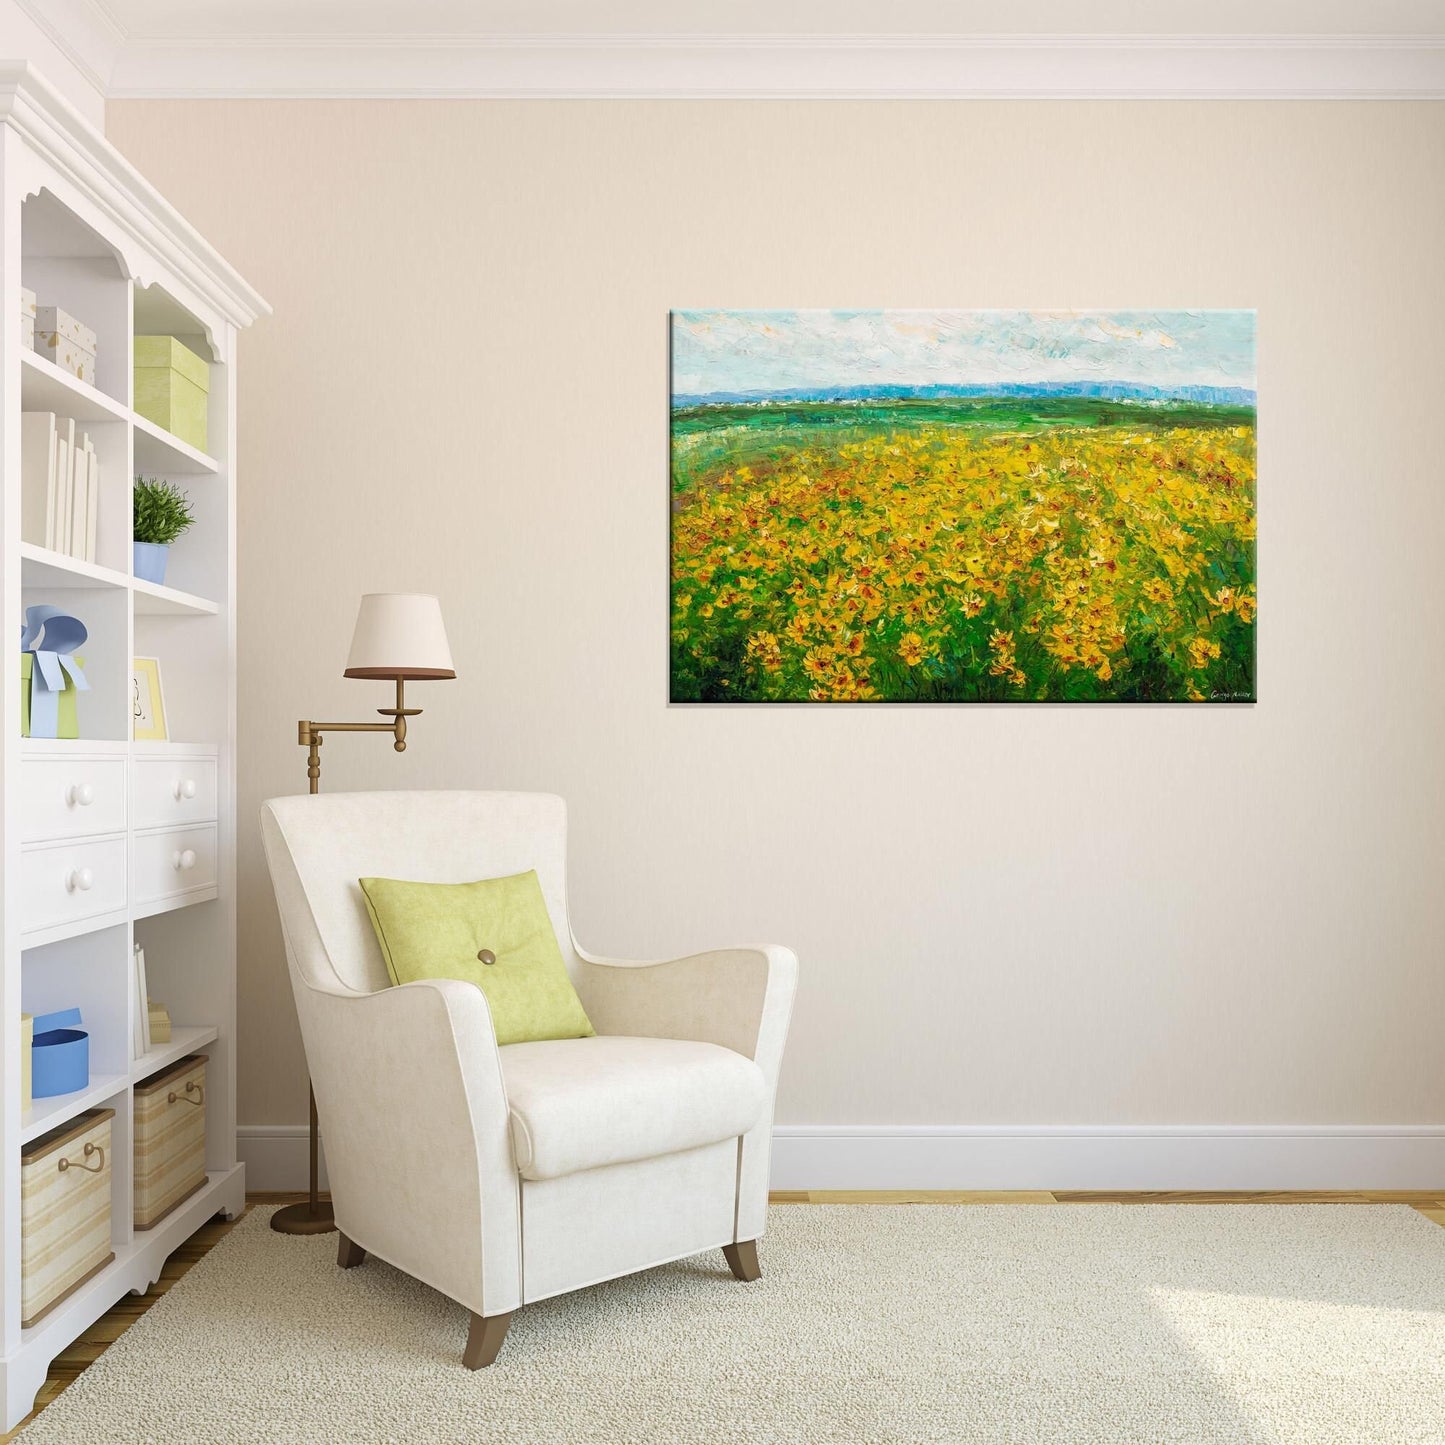 Original Oil Painting Sunflower Field Tuscany, Canvas Painting, Oil On Canvas Painting, Landscape Painting, Extra Large Abstract Painting